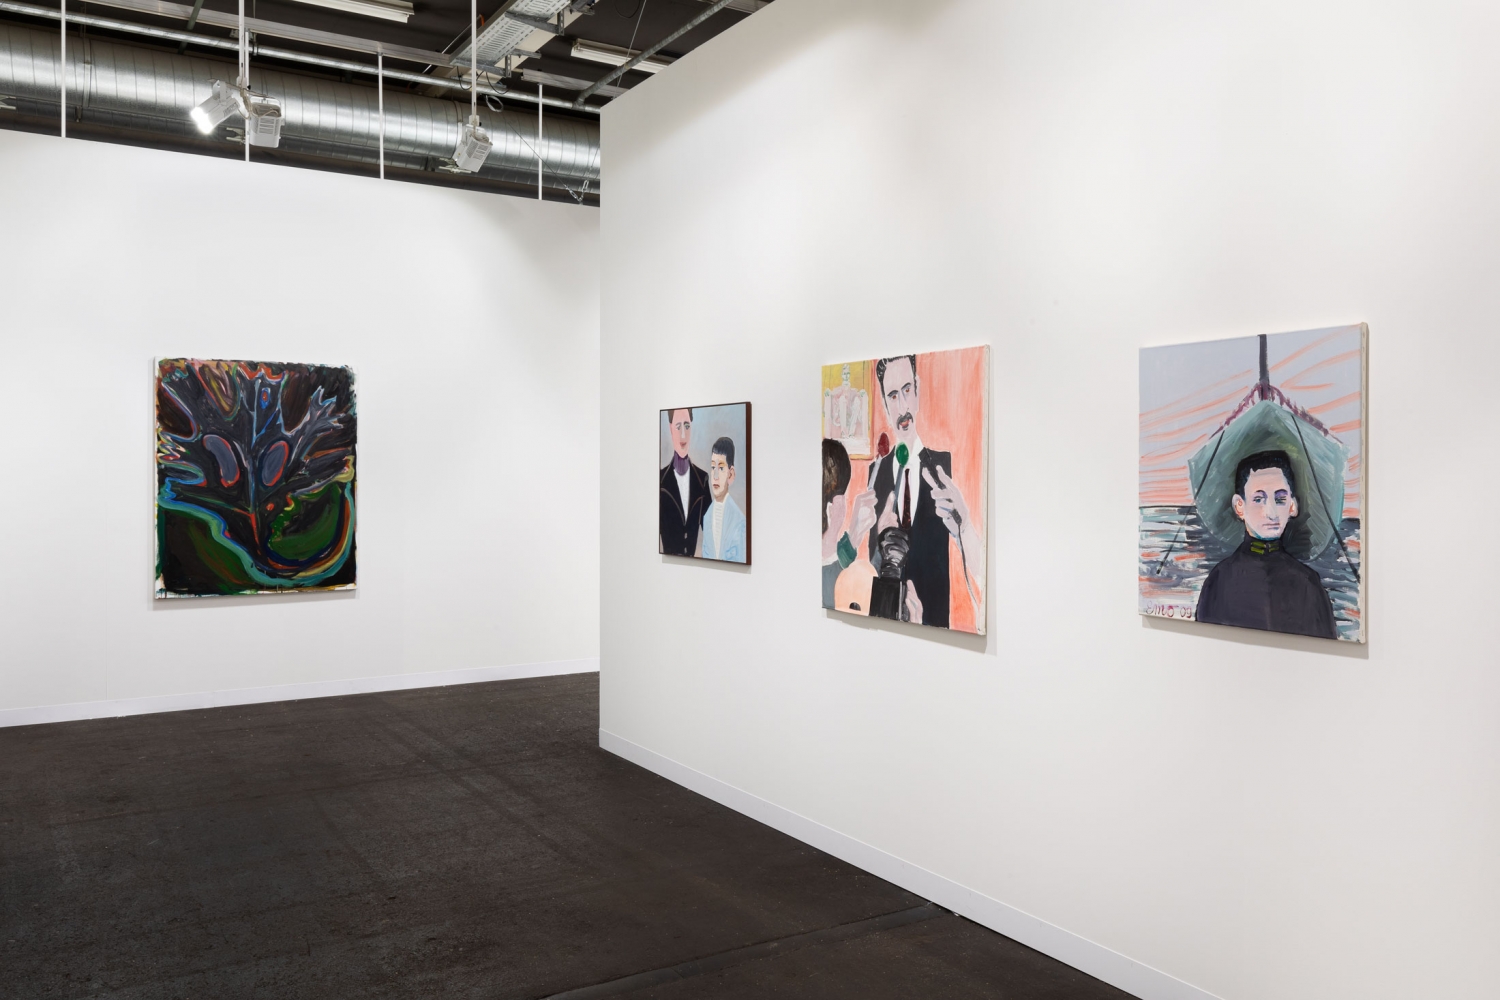 Luhring Augustine

Art Basel, Booth A3

Installation view

2019

Pictured from left: Josh Smith, Emo Verkerk